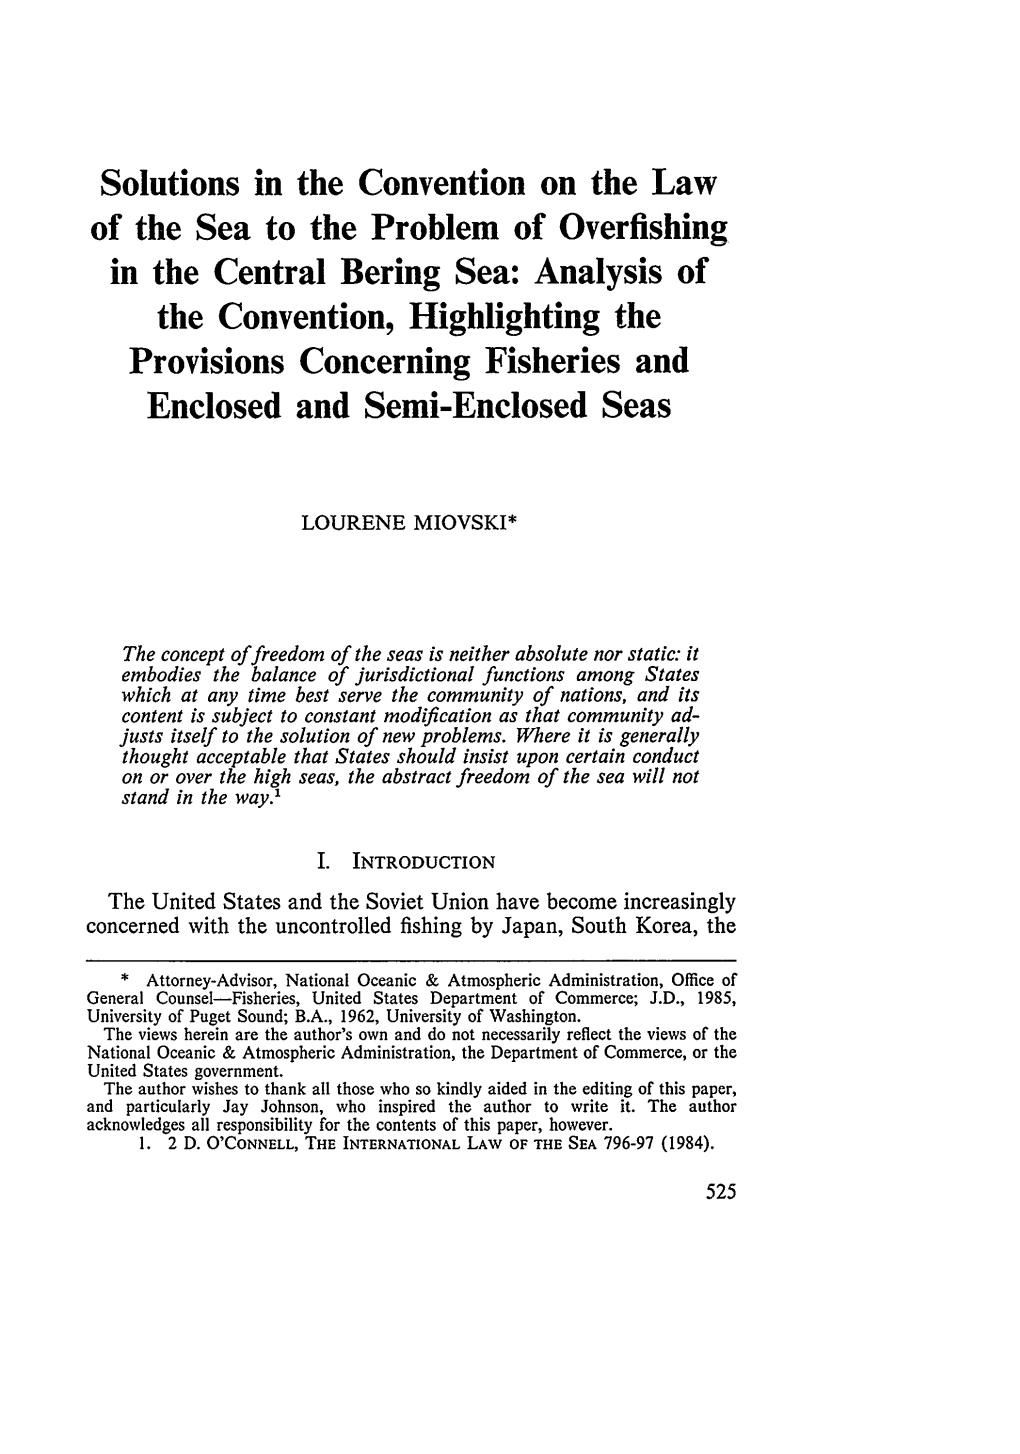 Solutions in the Convention on the Law of the Sea to the Problem Of